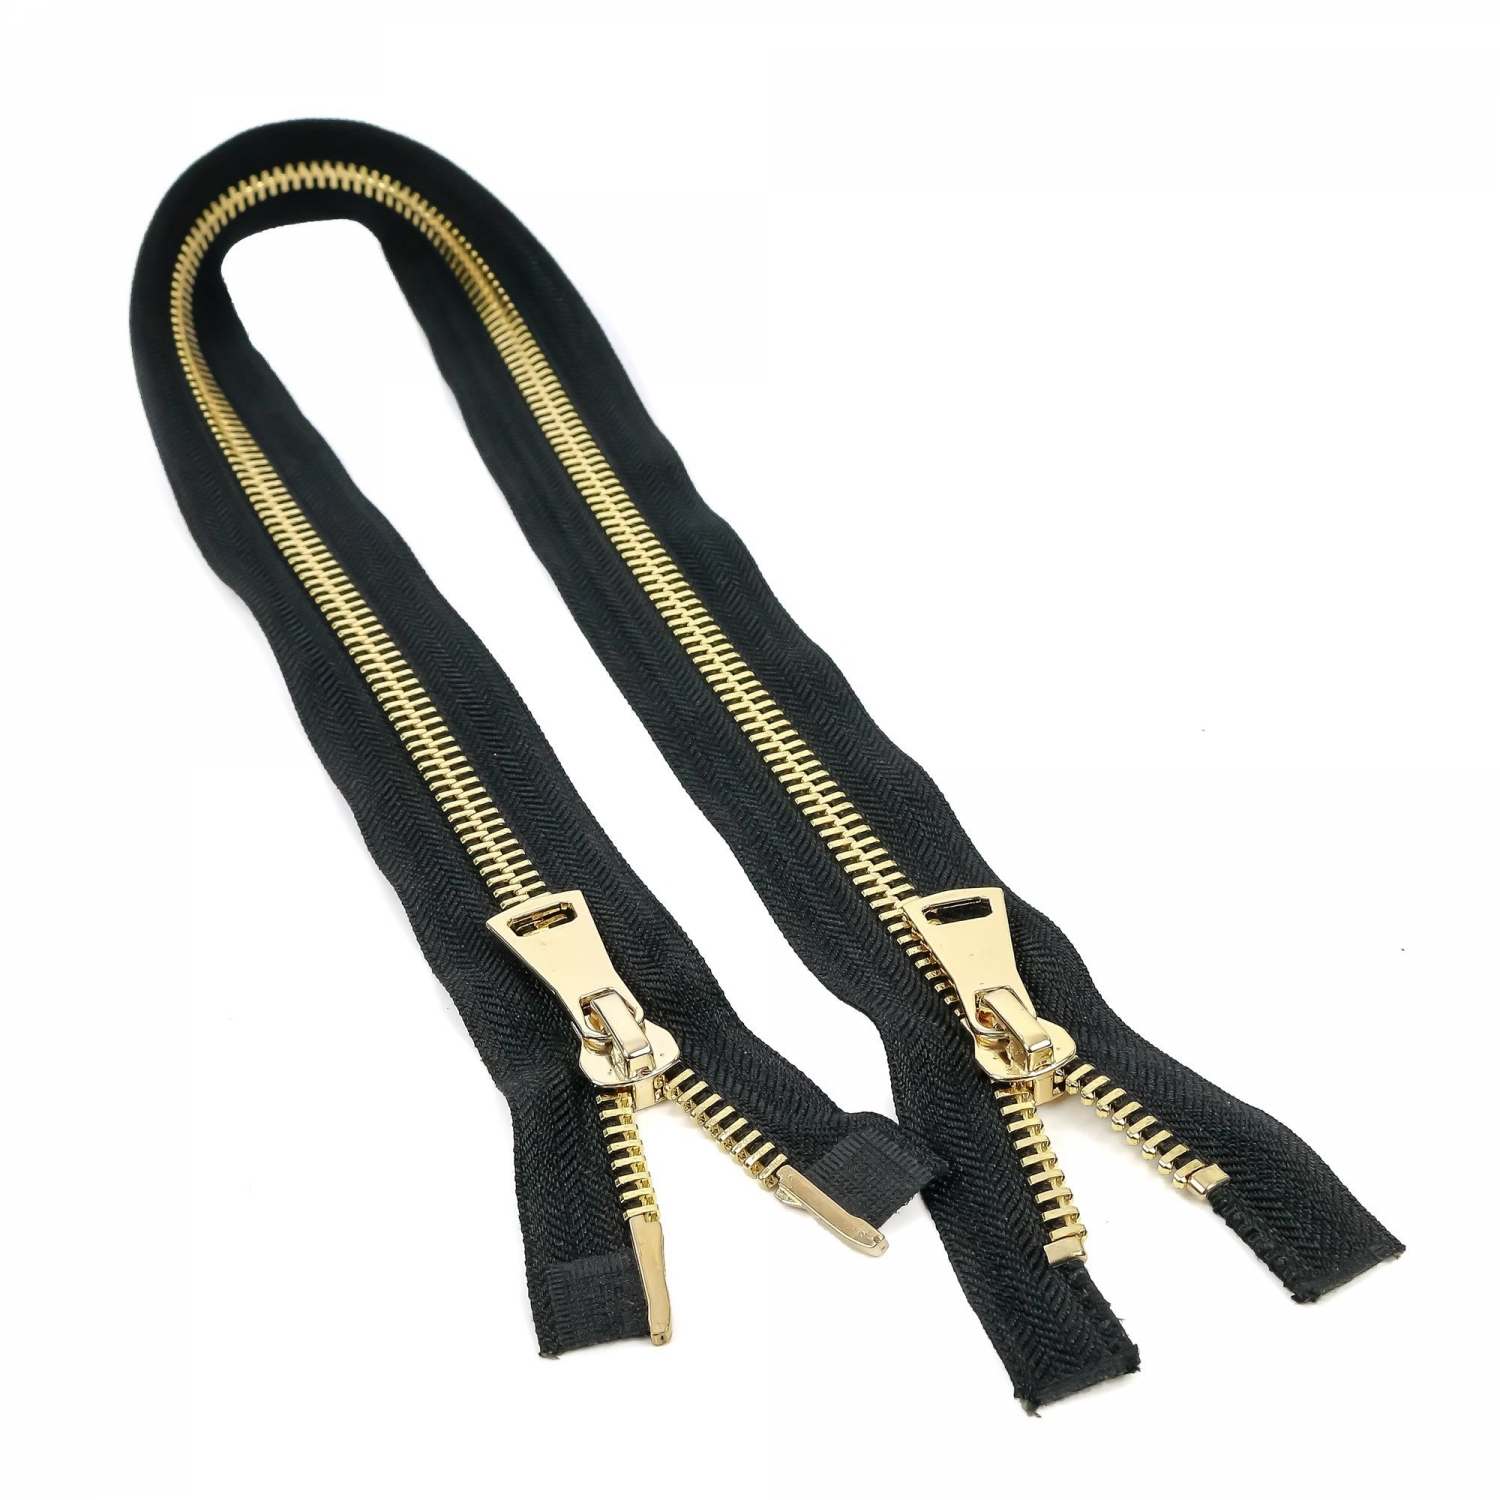 80 cm Metallic Zipper with 2 Sliders with 10 mm Teeth (25 pcs/pack)